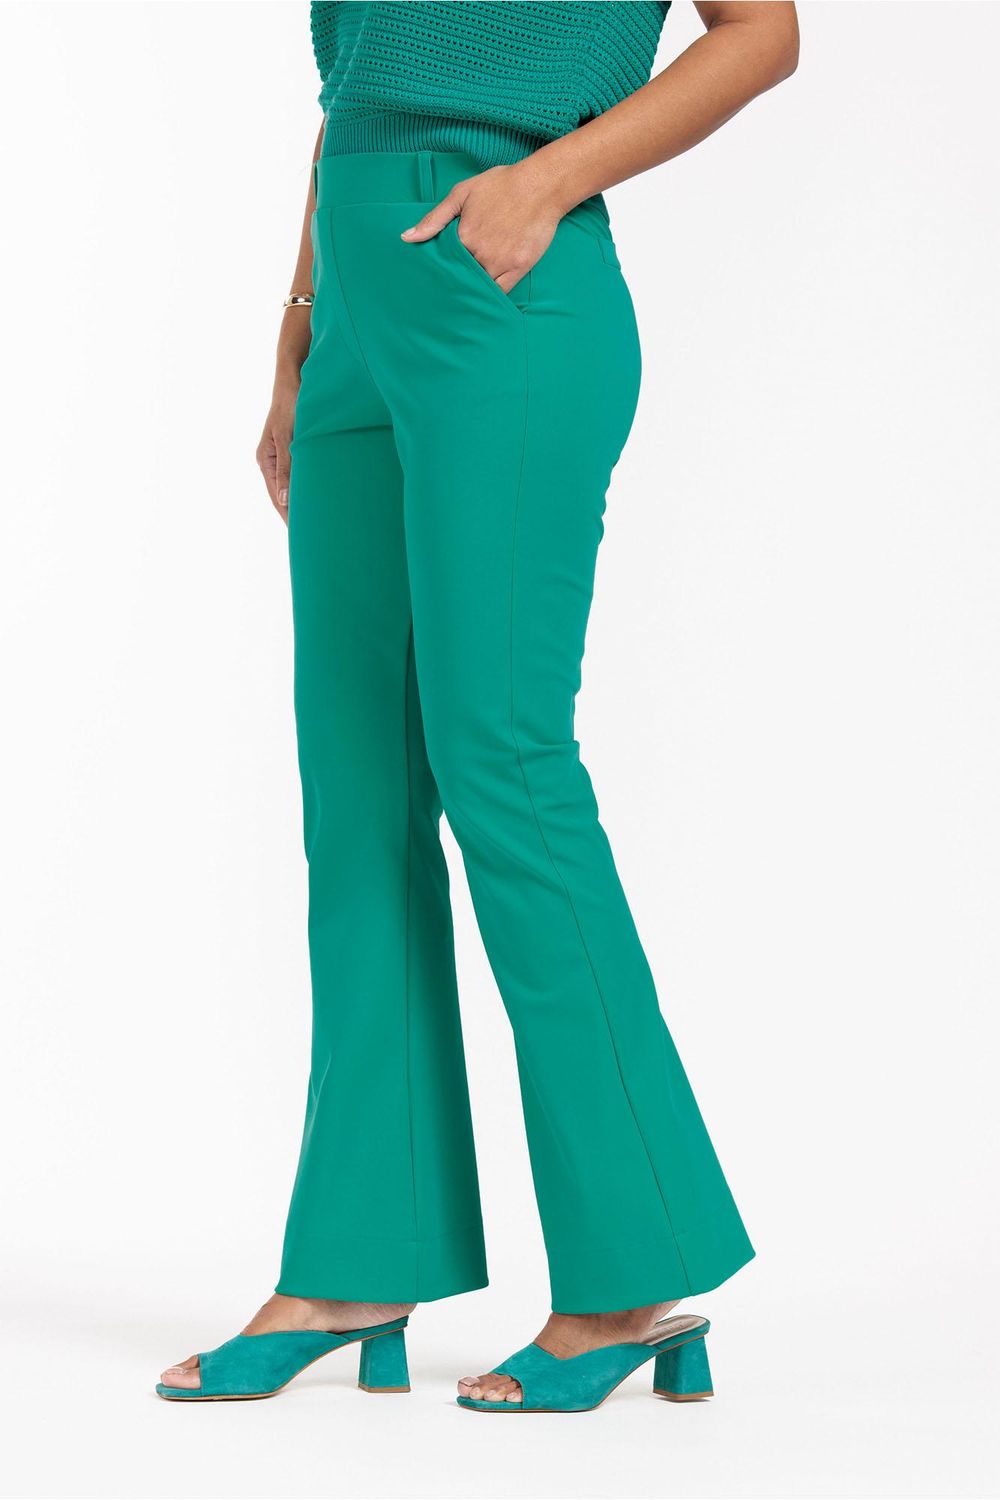 Studio Anneloes Flair bonded trousers, smaragd